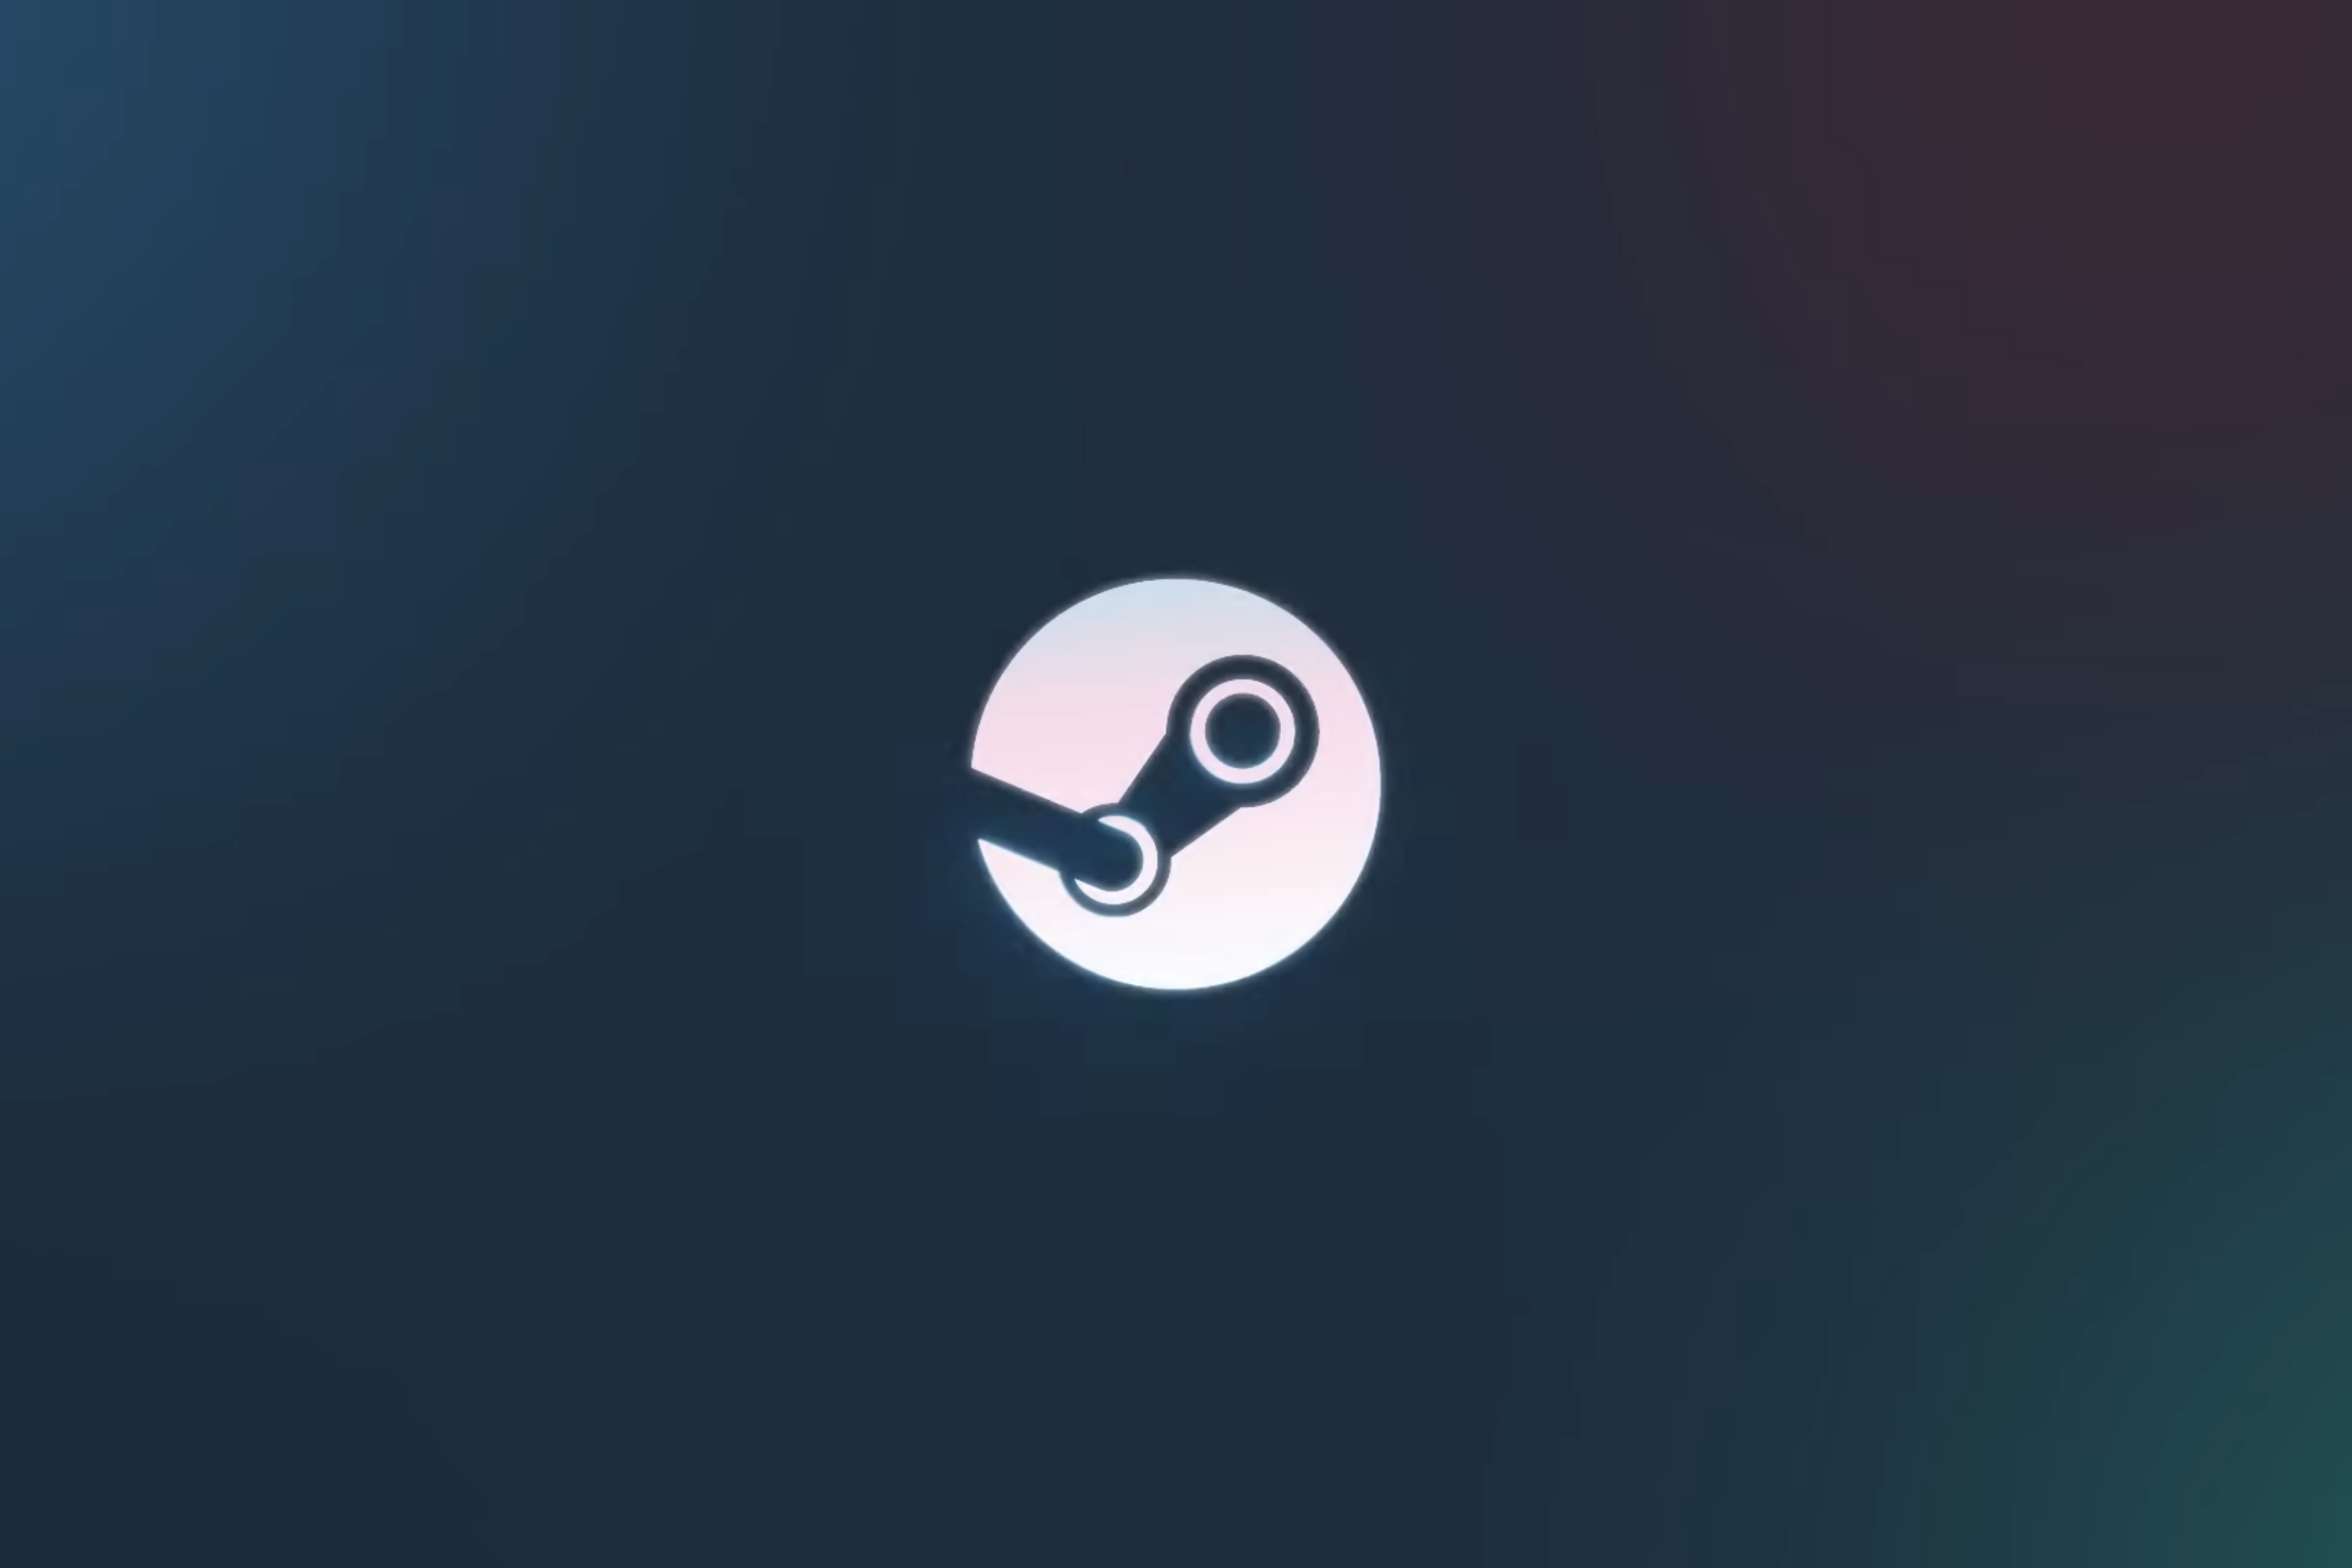 Valve overhauls the Steam Store with new categories, hubs and